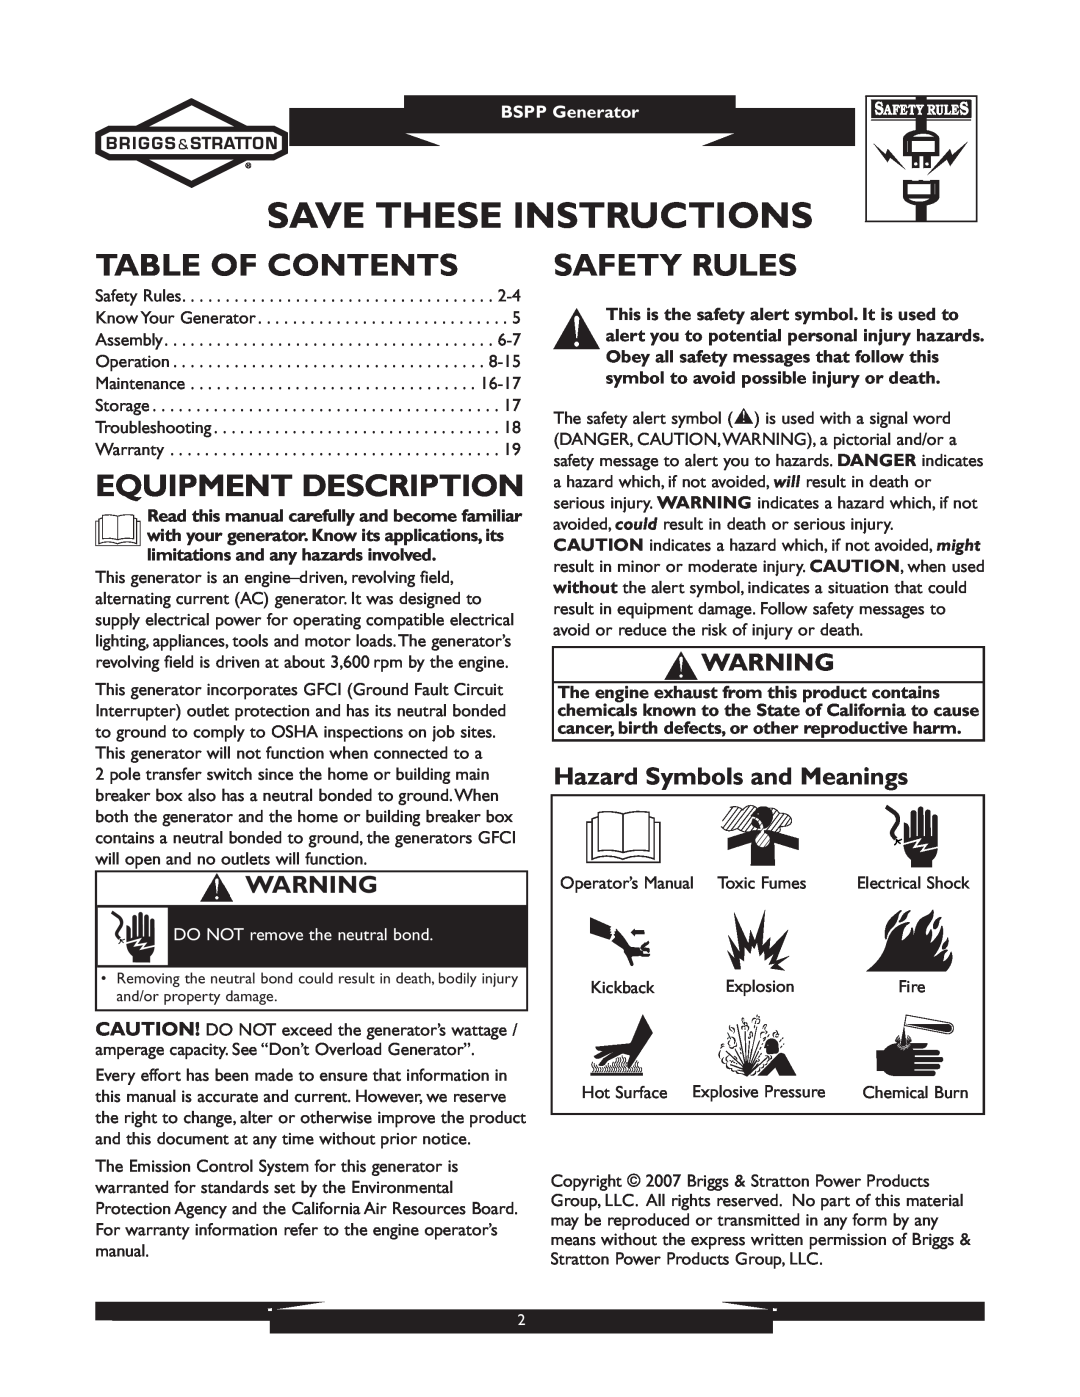 Briggs & Stratton 01933-1 Table Of Contents, Equipment Description, Safety Rules, Hazard Symbols and Meanings 